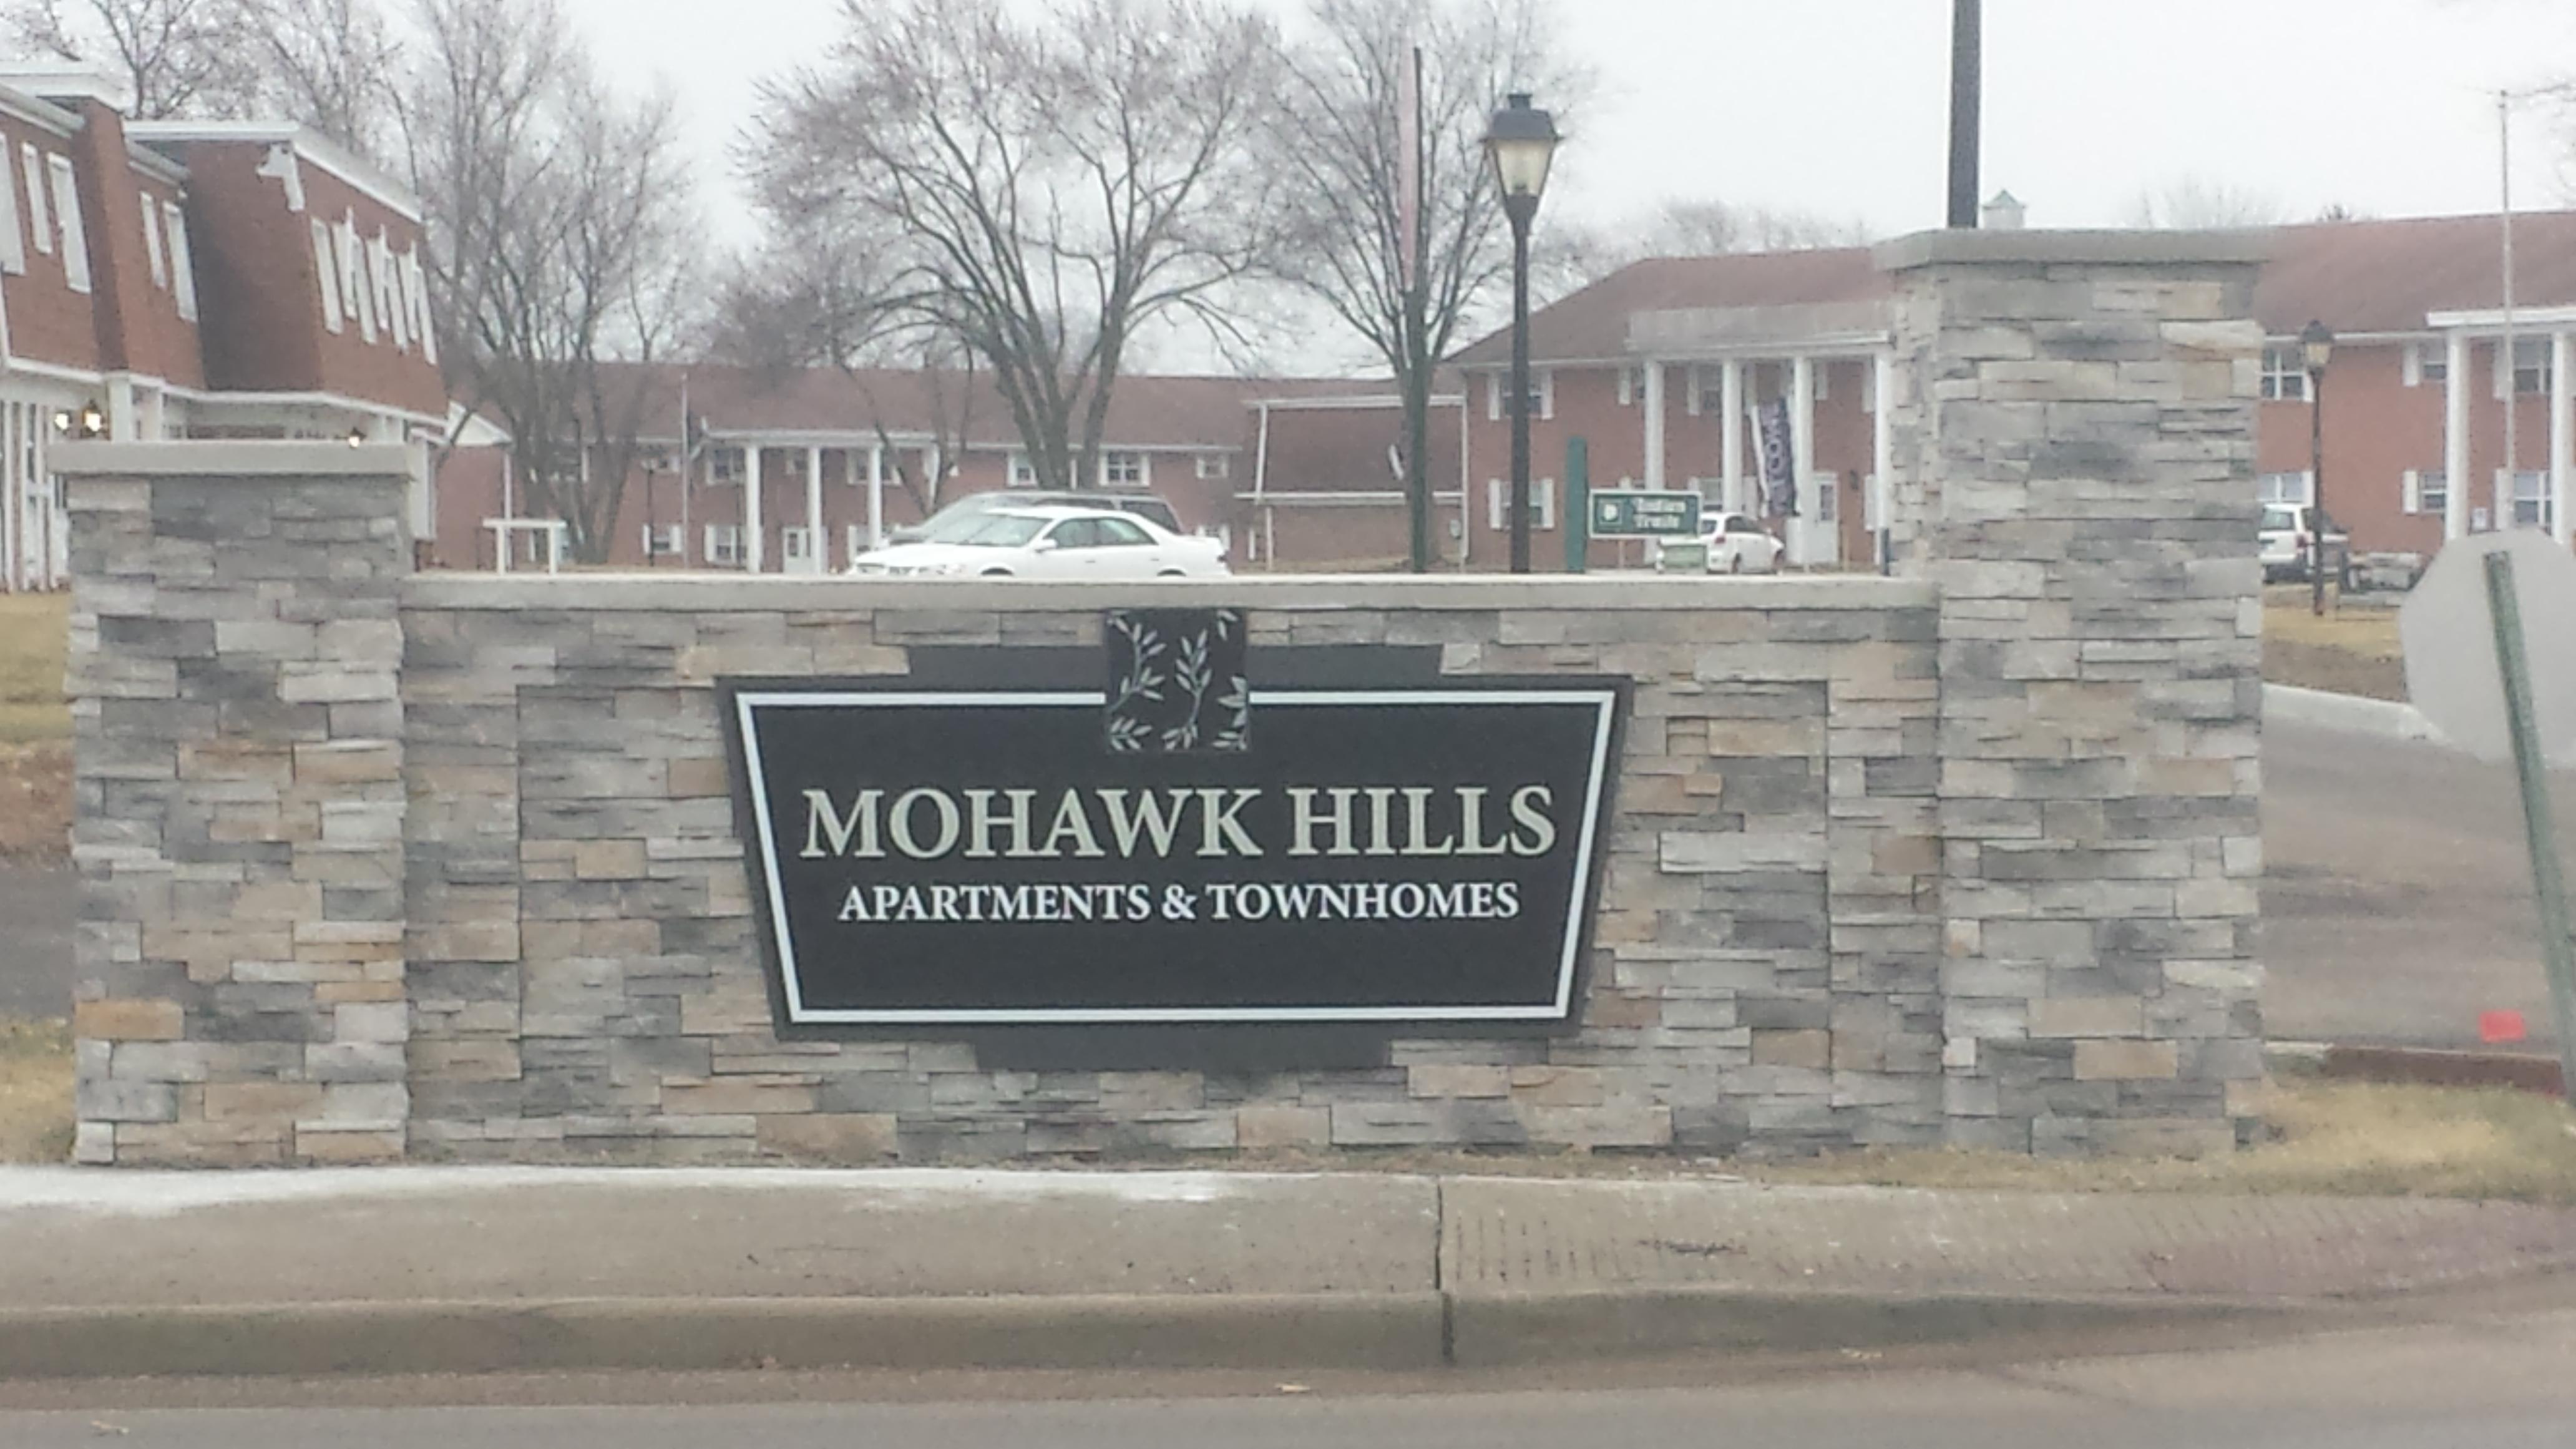 This sign is constructed of solid masonry with a manufactured stone veneer, and poured in place concrete caps 